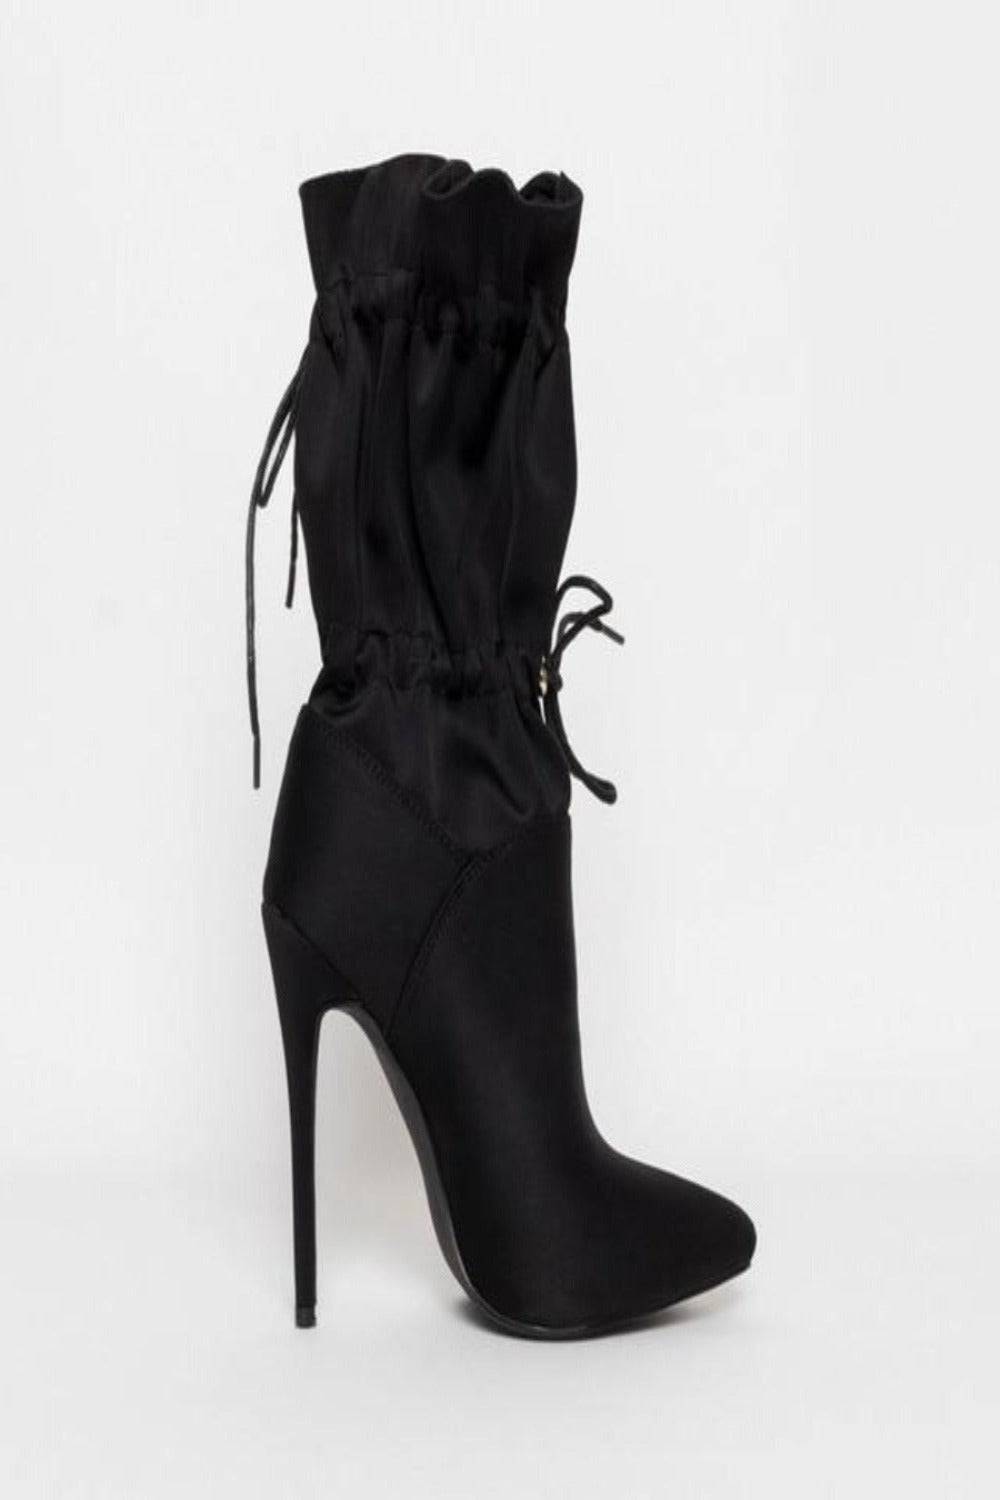 Handmade Camo Lace Up Stiletto High Heel Black Ankle Boots - TGC Boutique - High Heel Boots